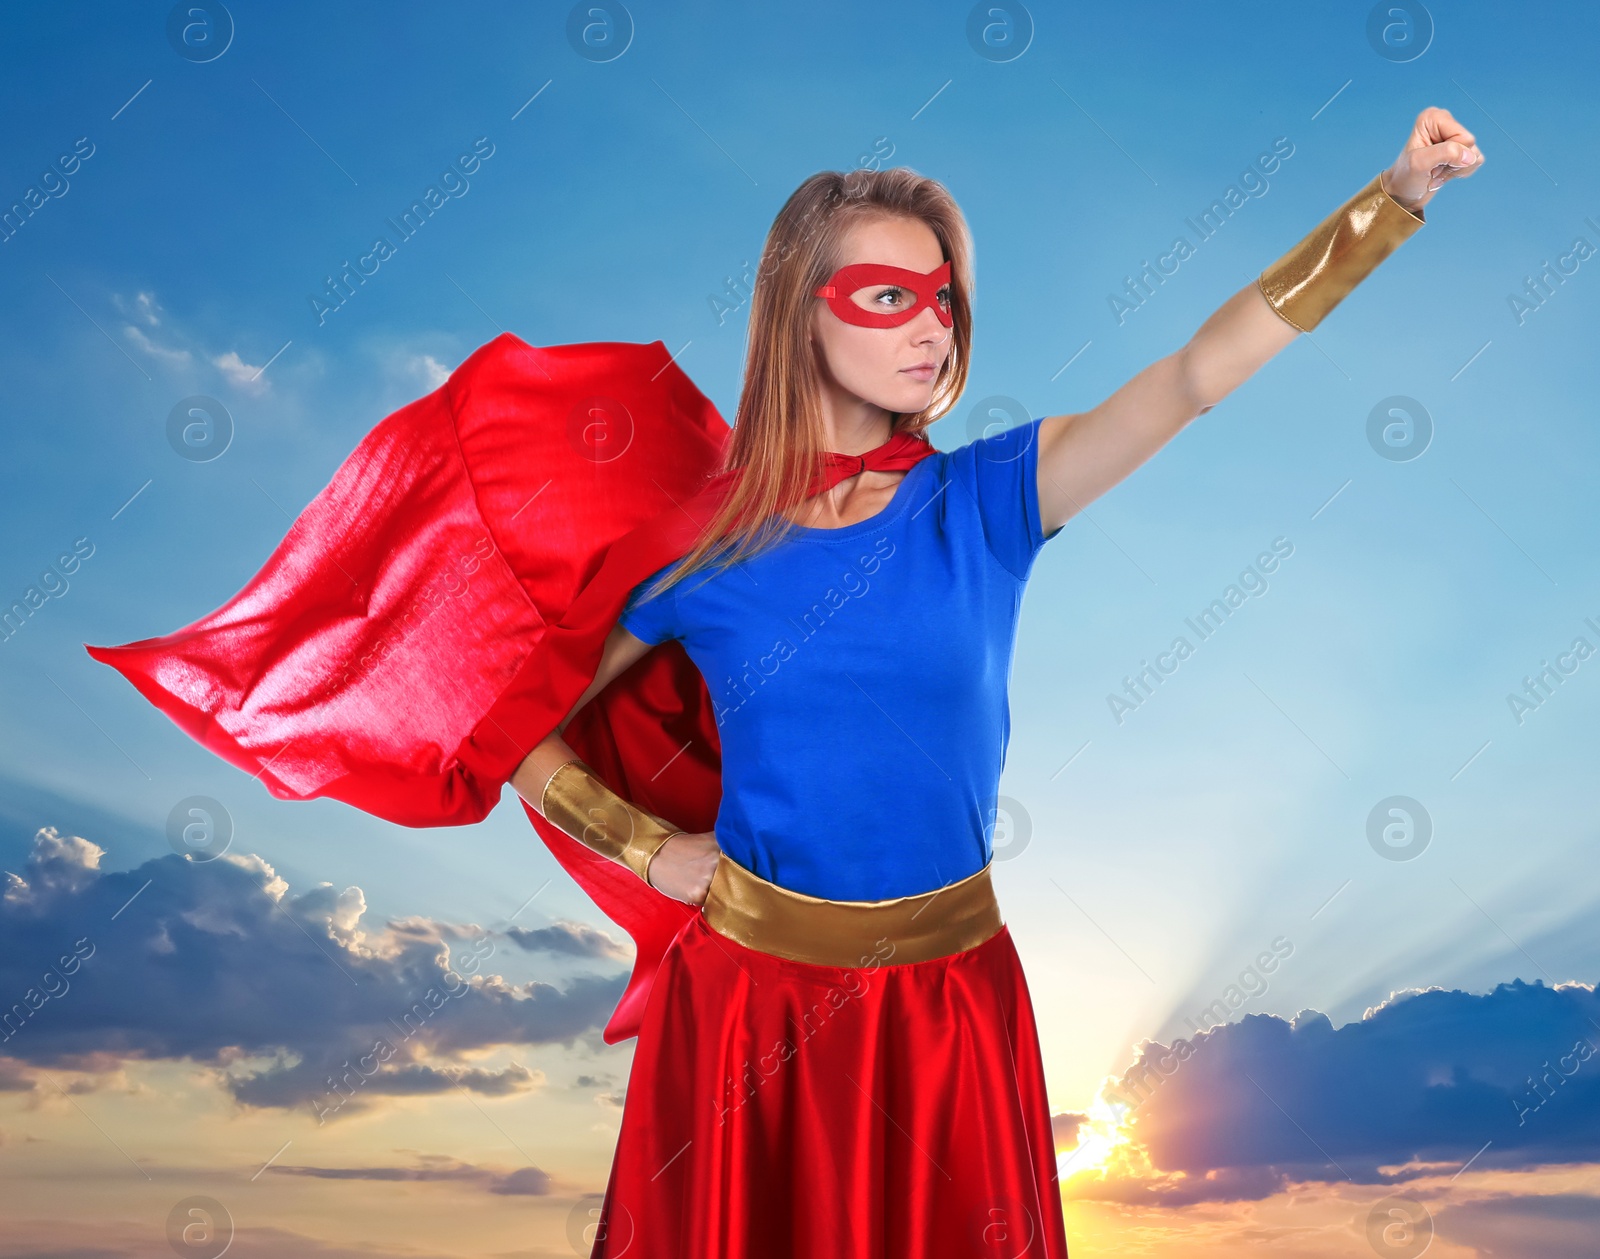 Image of Confident woman wearing superhero costume against cloudy sky